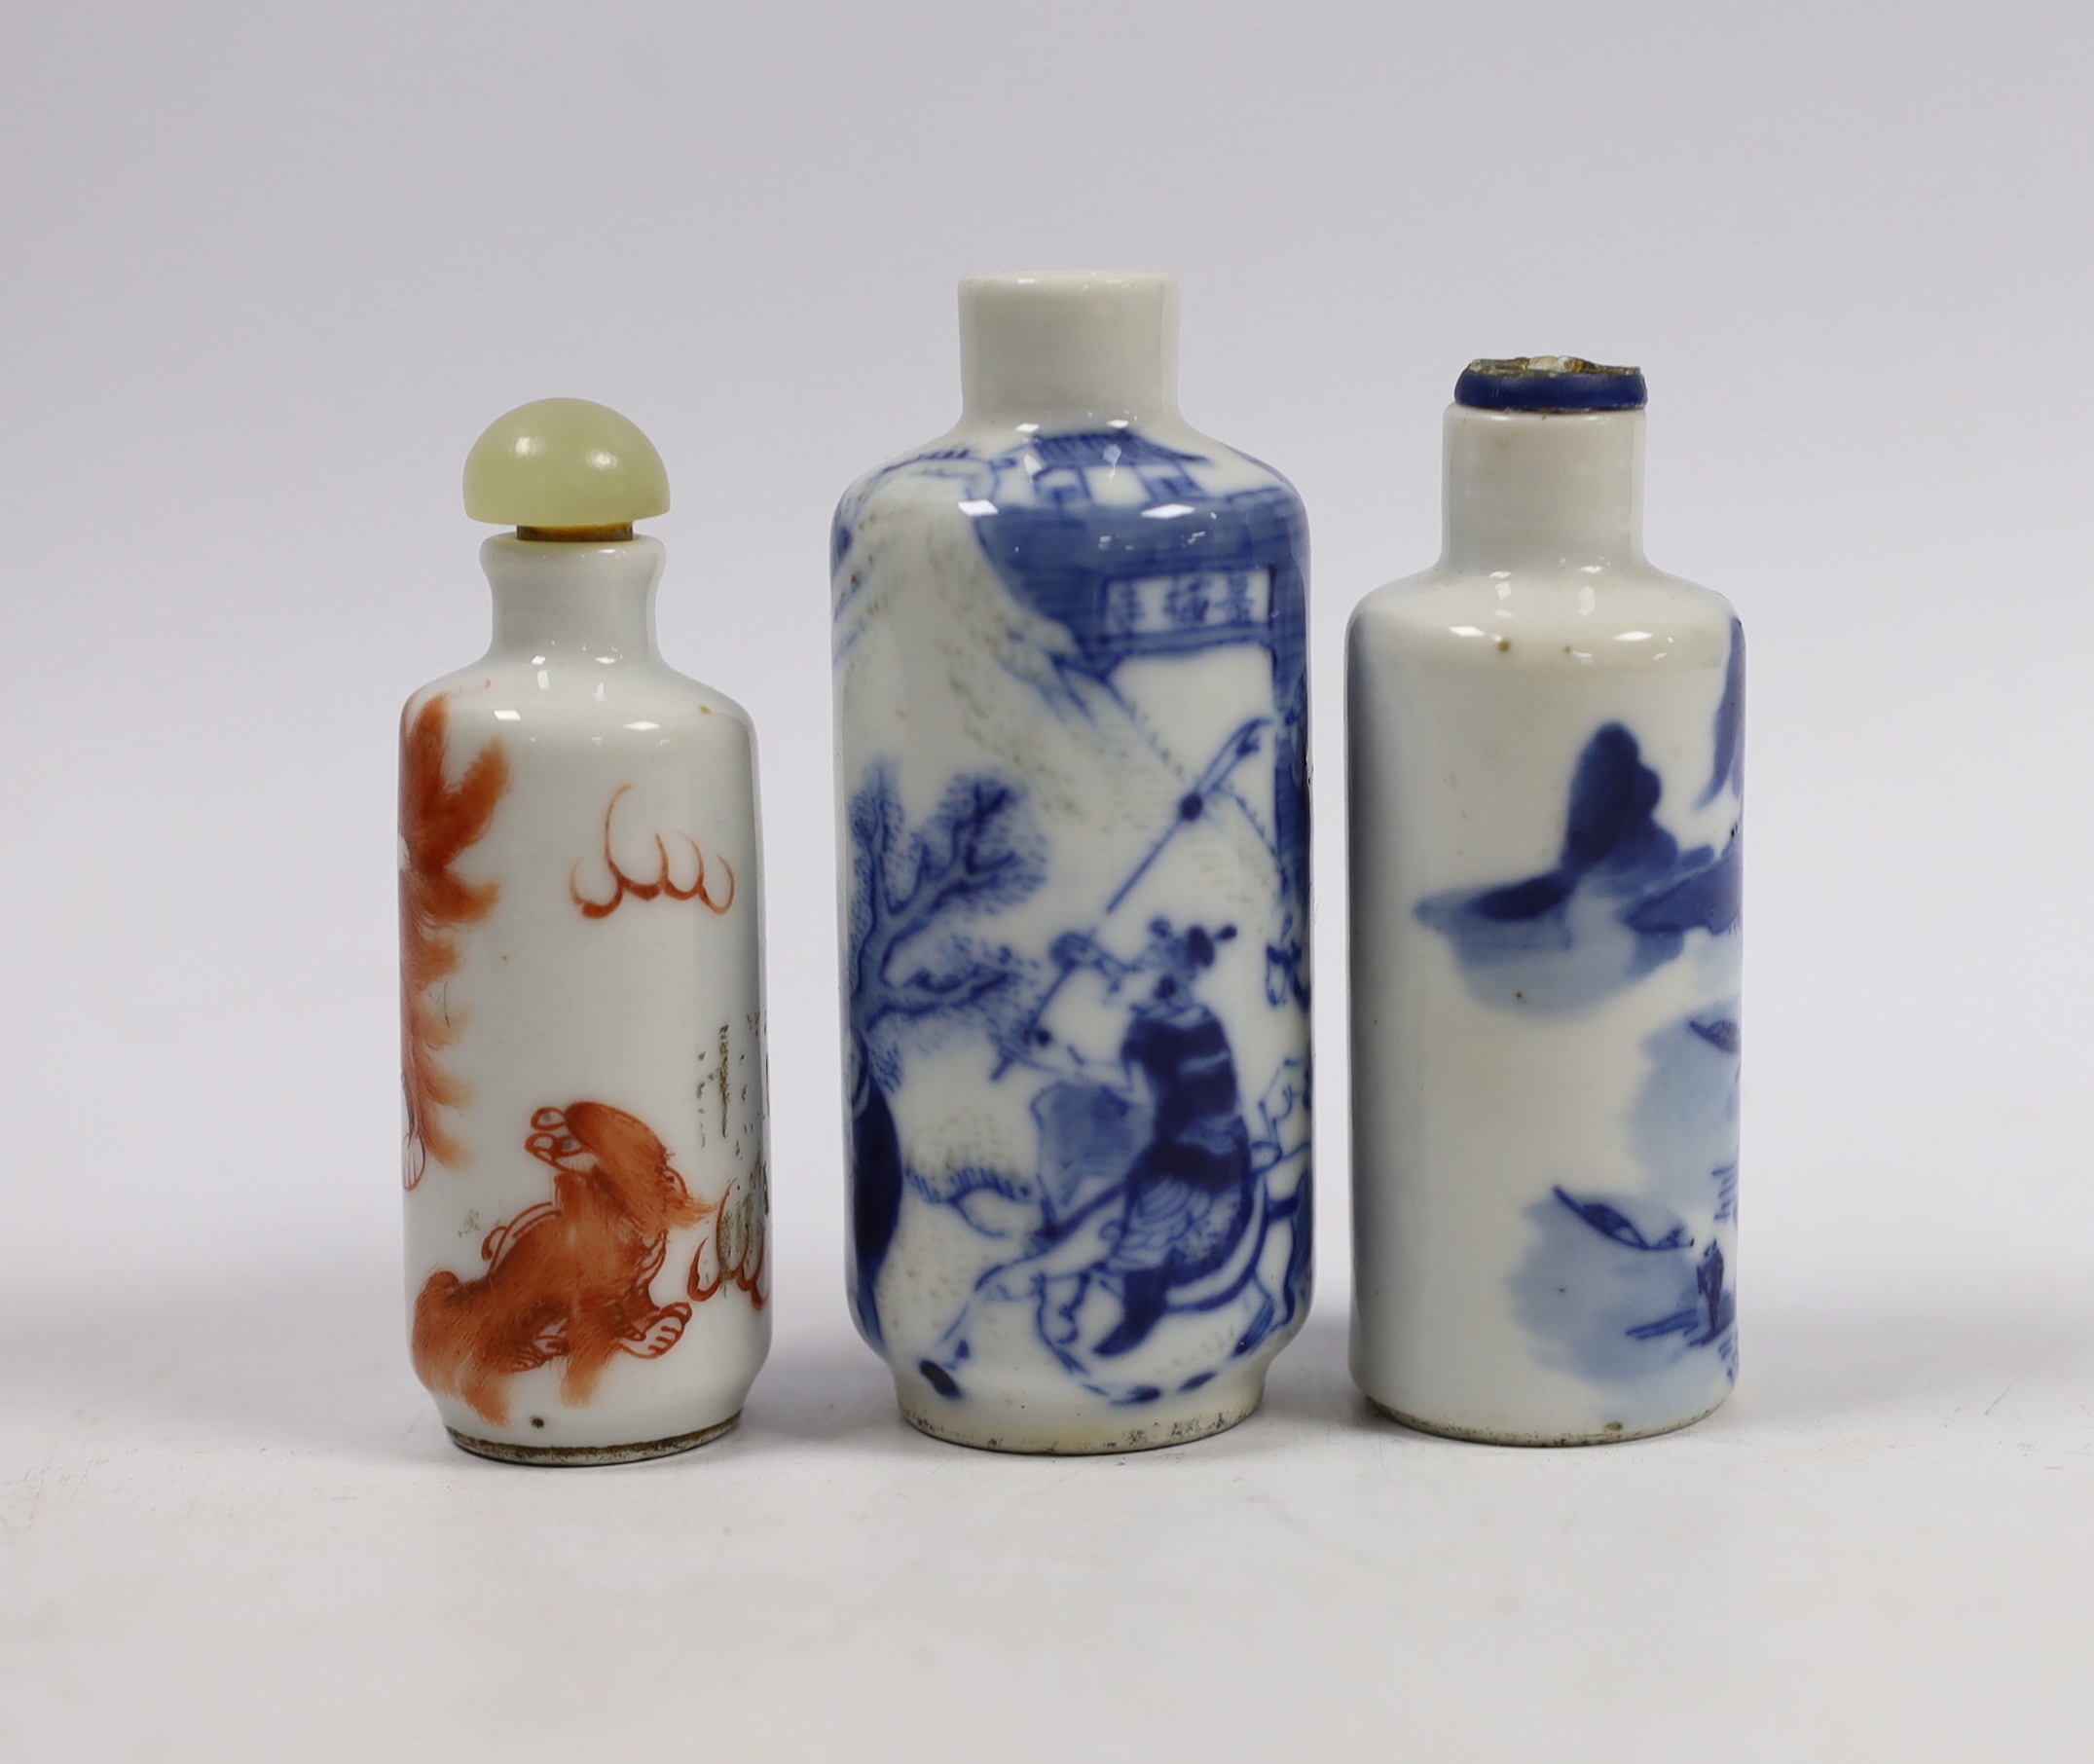 Three late 19th century Chinese porcelain snuff bottles, tallest 8cm